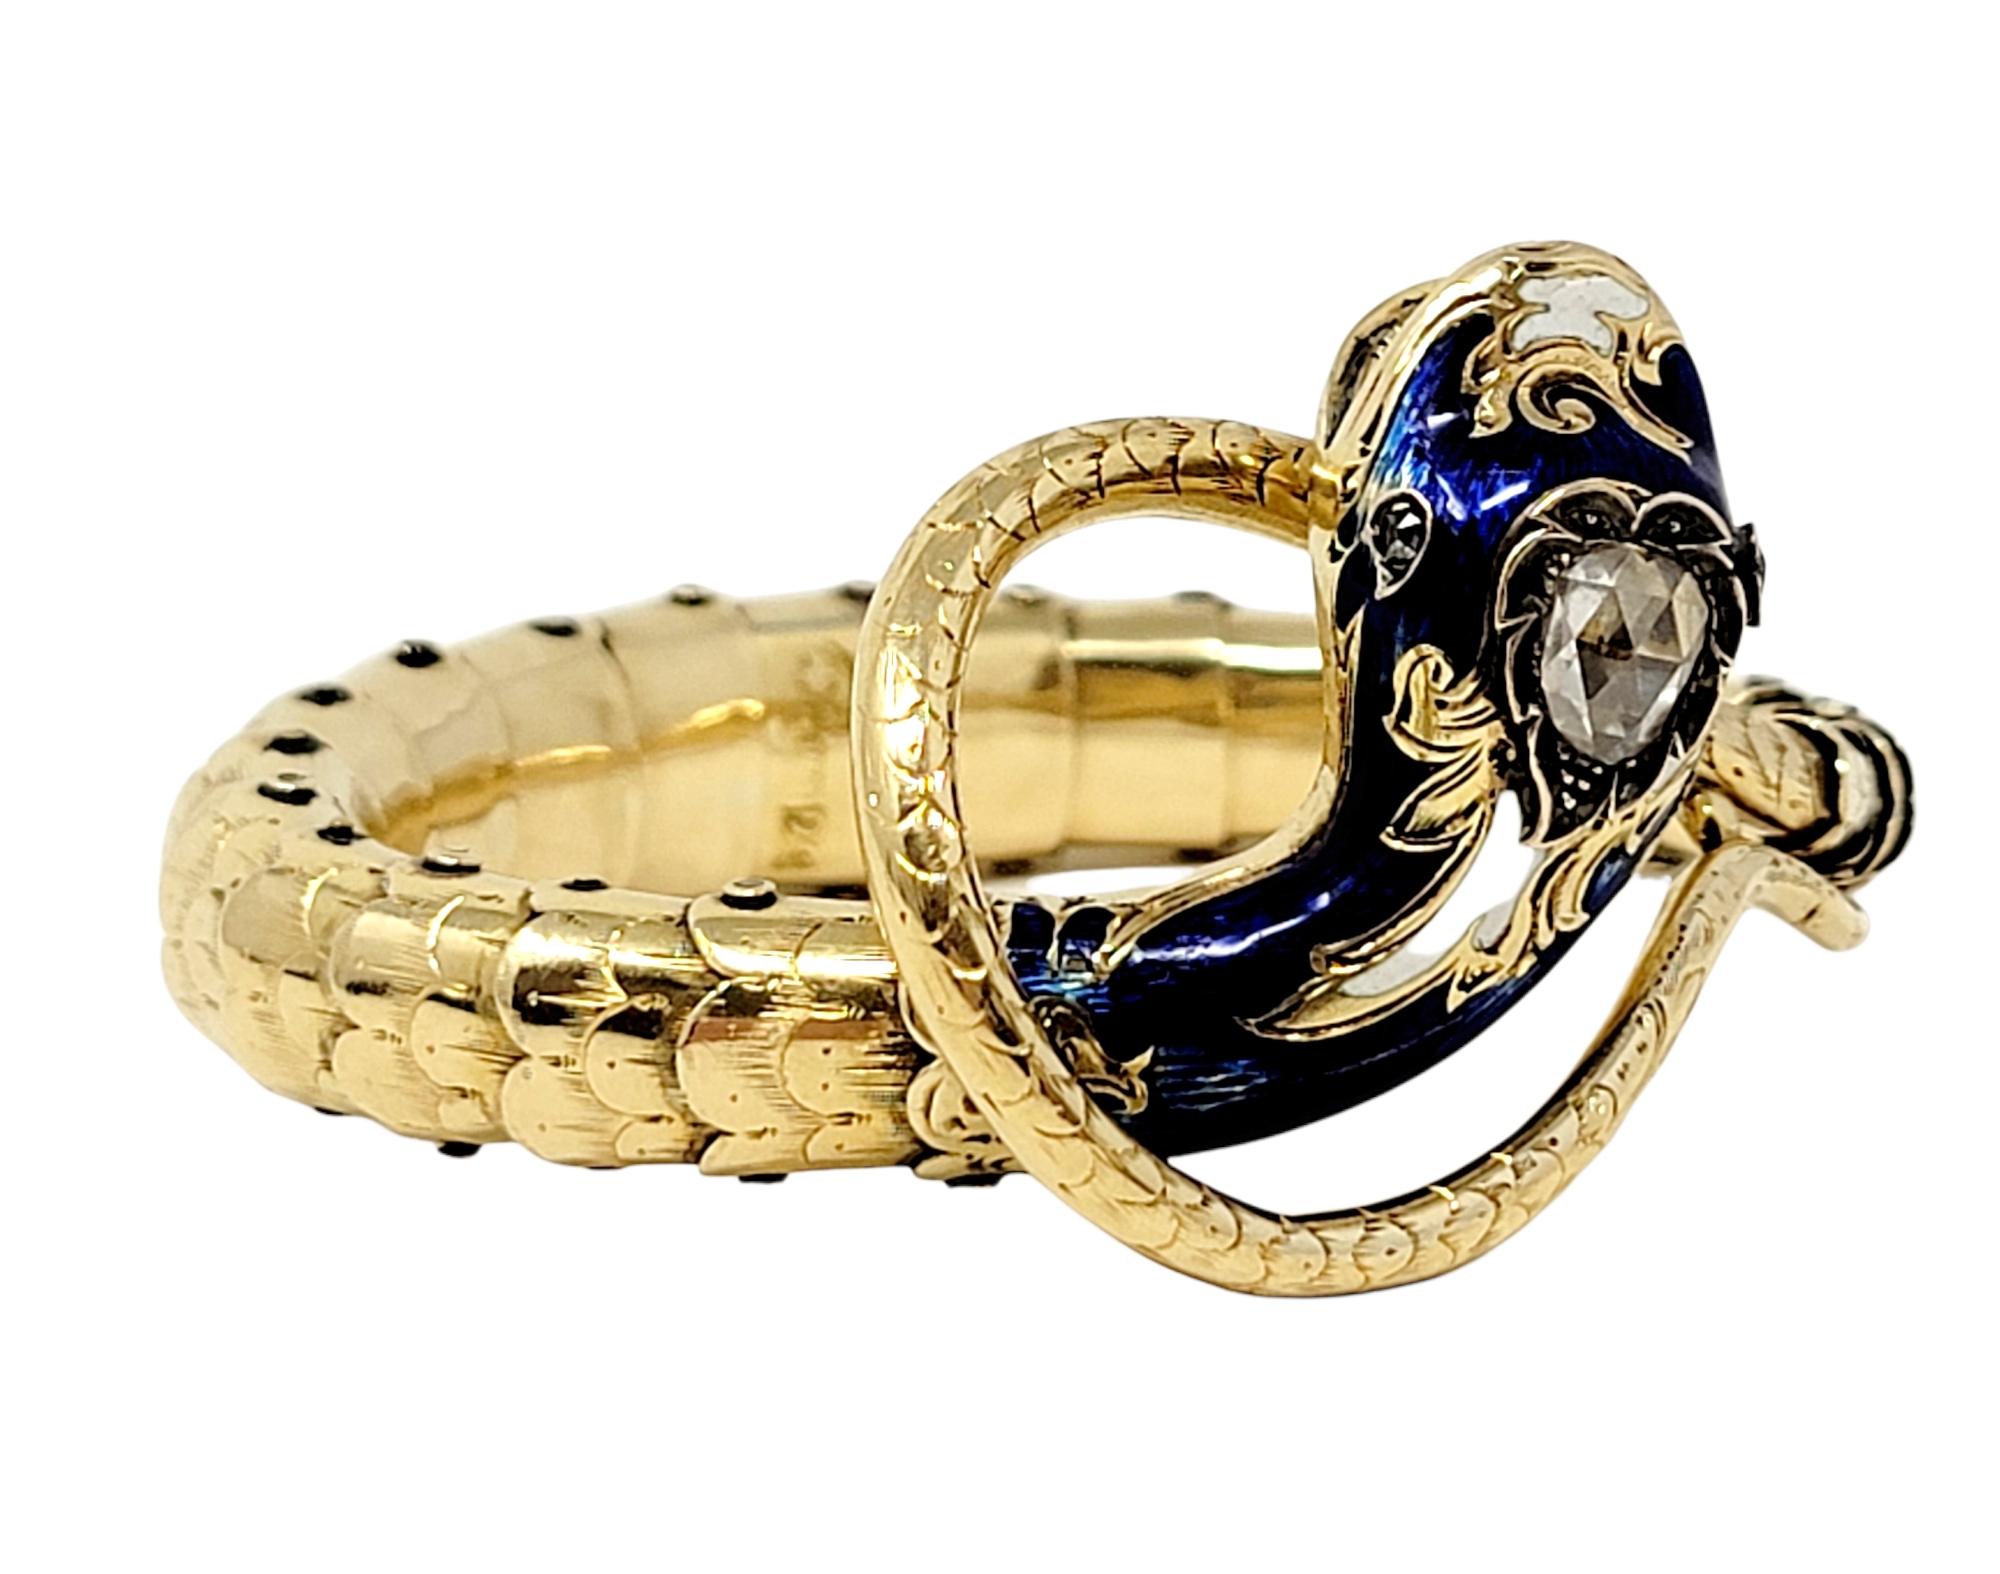 This incredible antique snake cuff bracelet is an absolute work of art! Featuring a flexible 14 karat yellow gold articulated body with scaled detailing, this snake slithers around your wrist for a perfect fit. The head of the serpent is highly